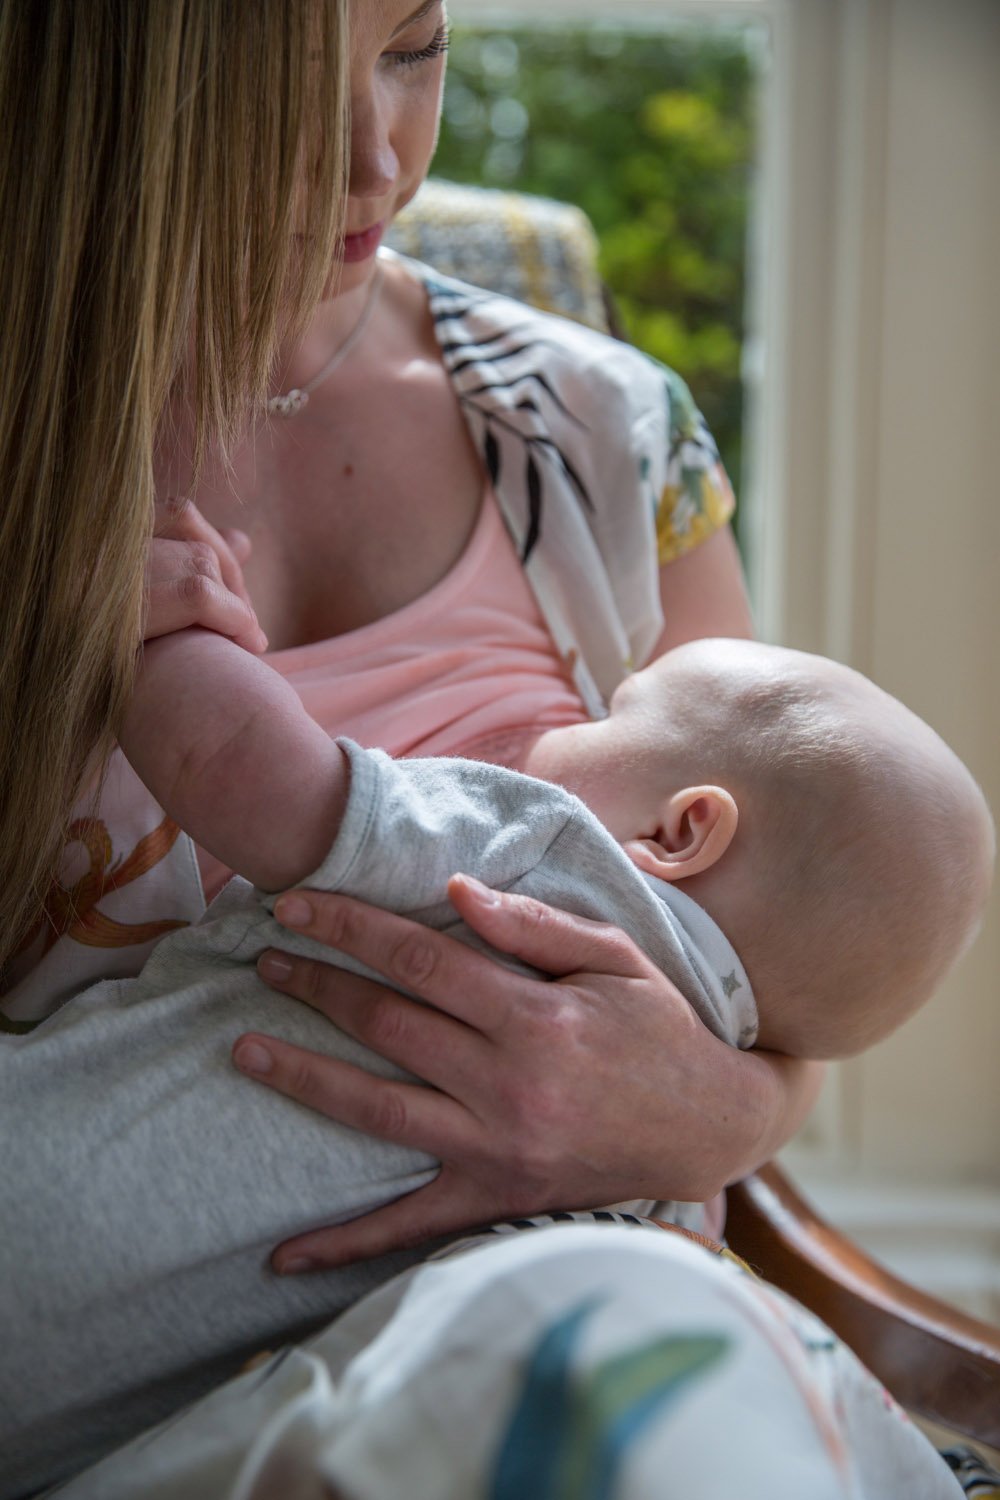 Lots of breastfeeding reduces infant stress